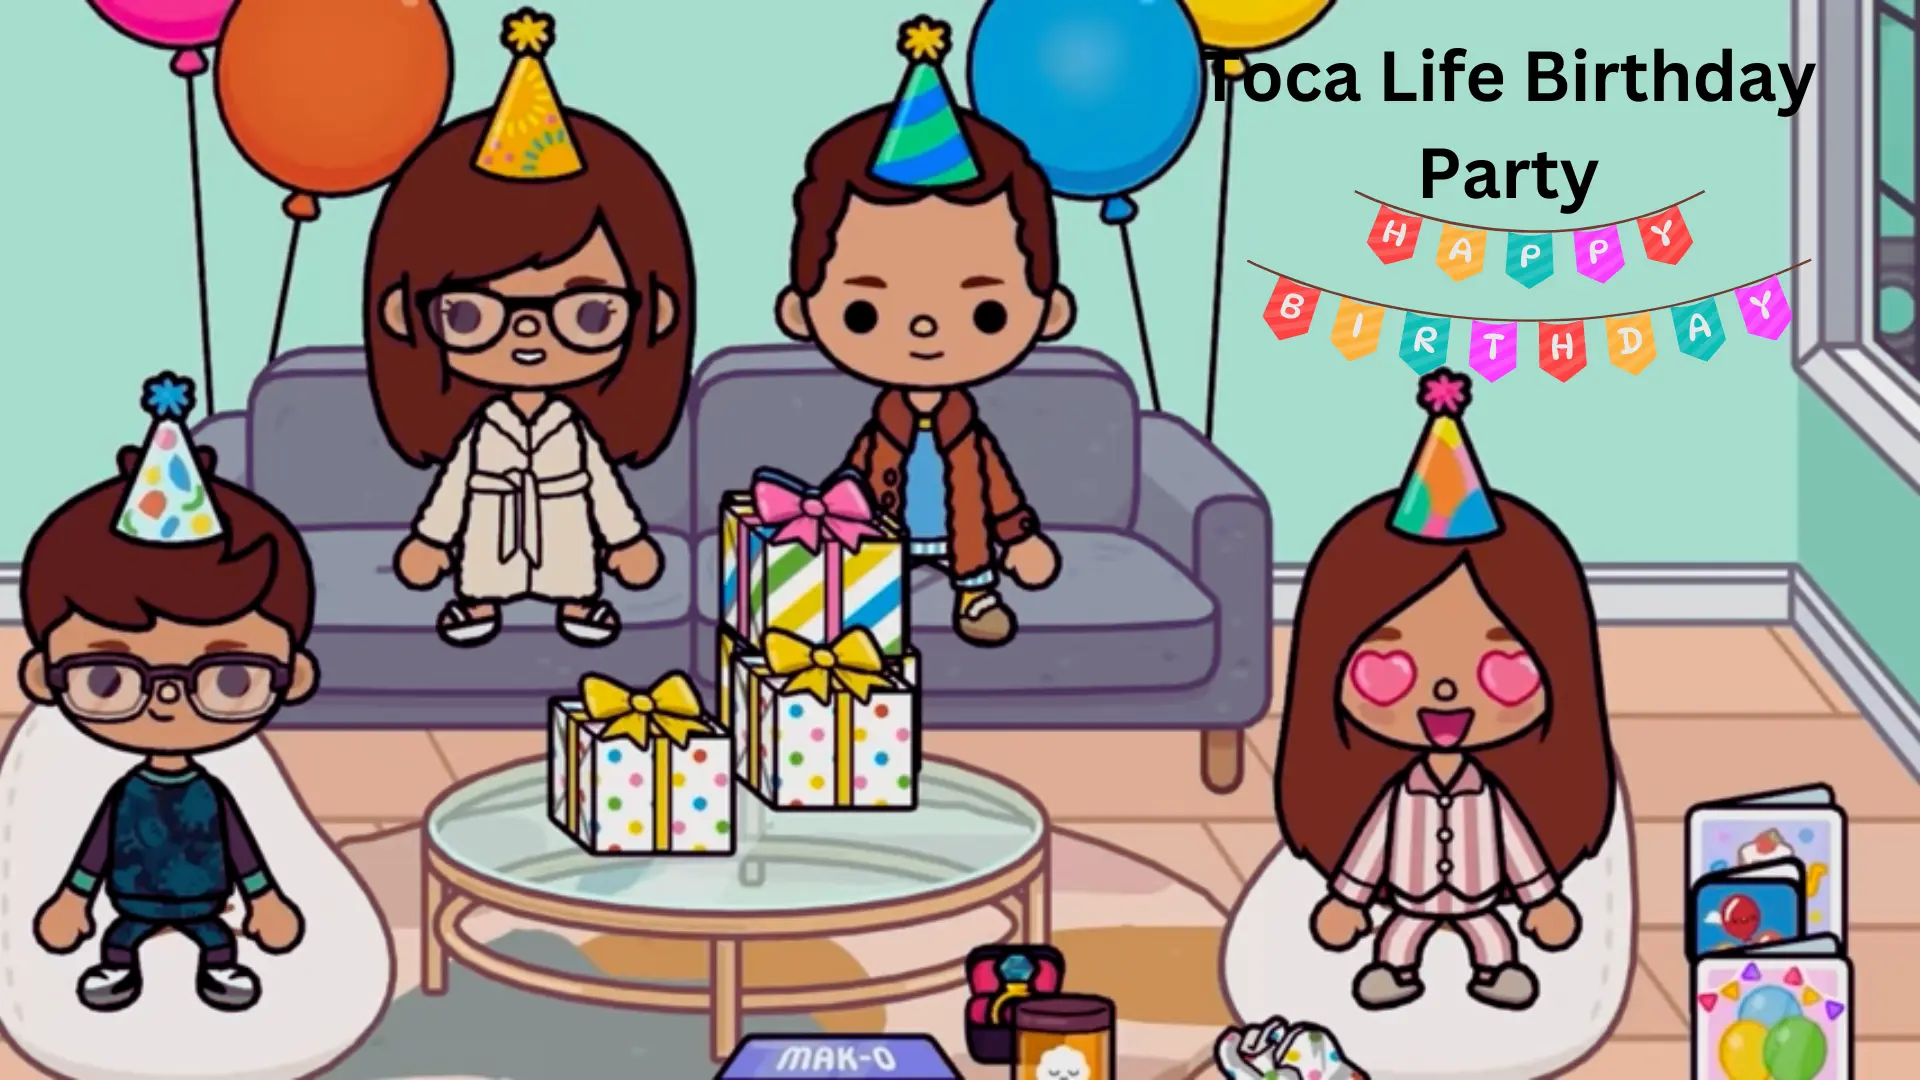 Celebrate with Toca Life Birthday Party fun